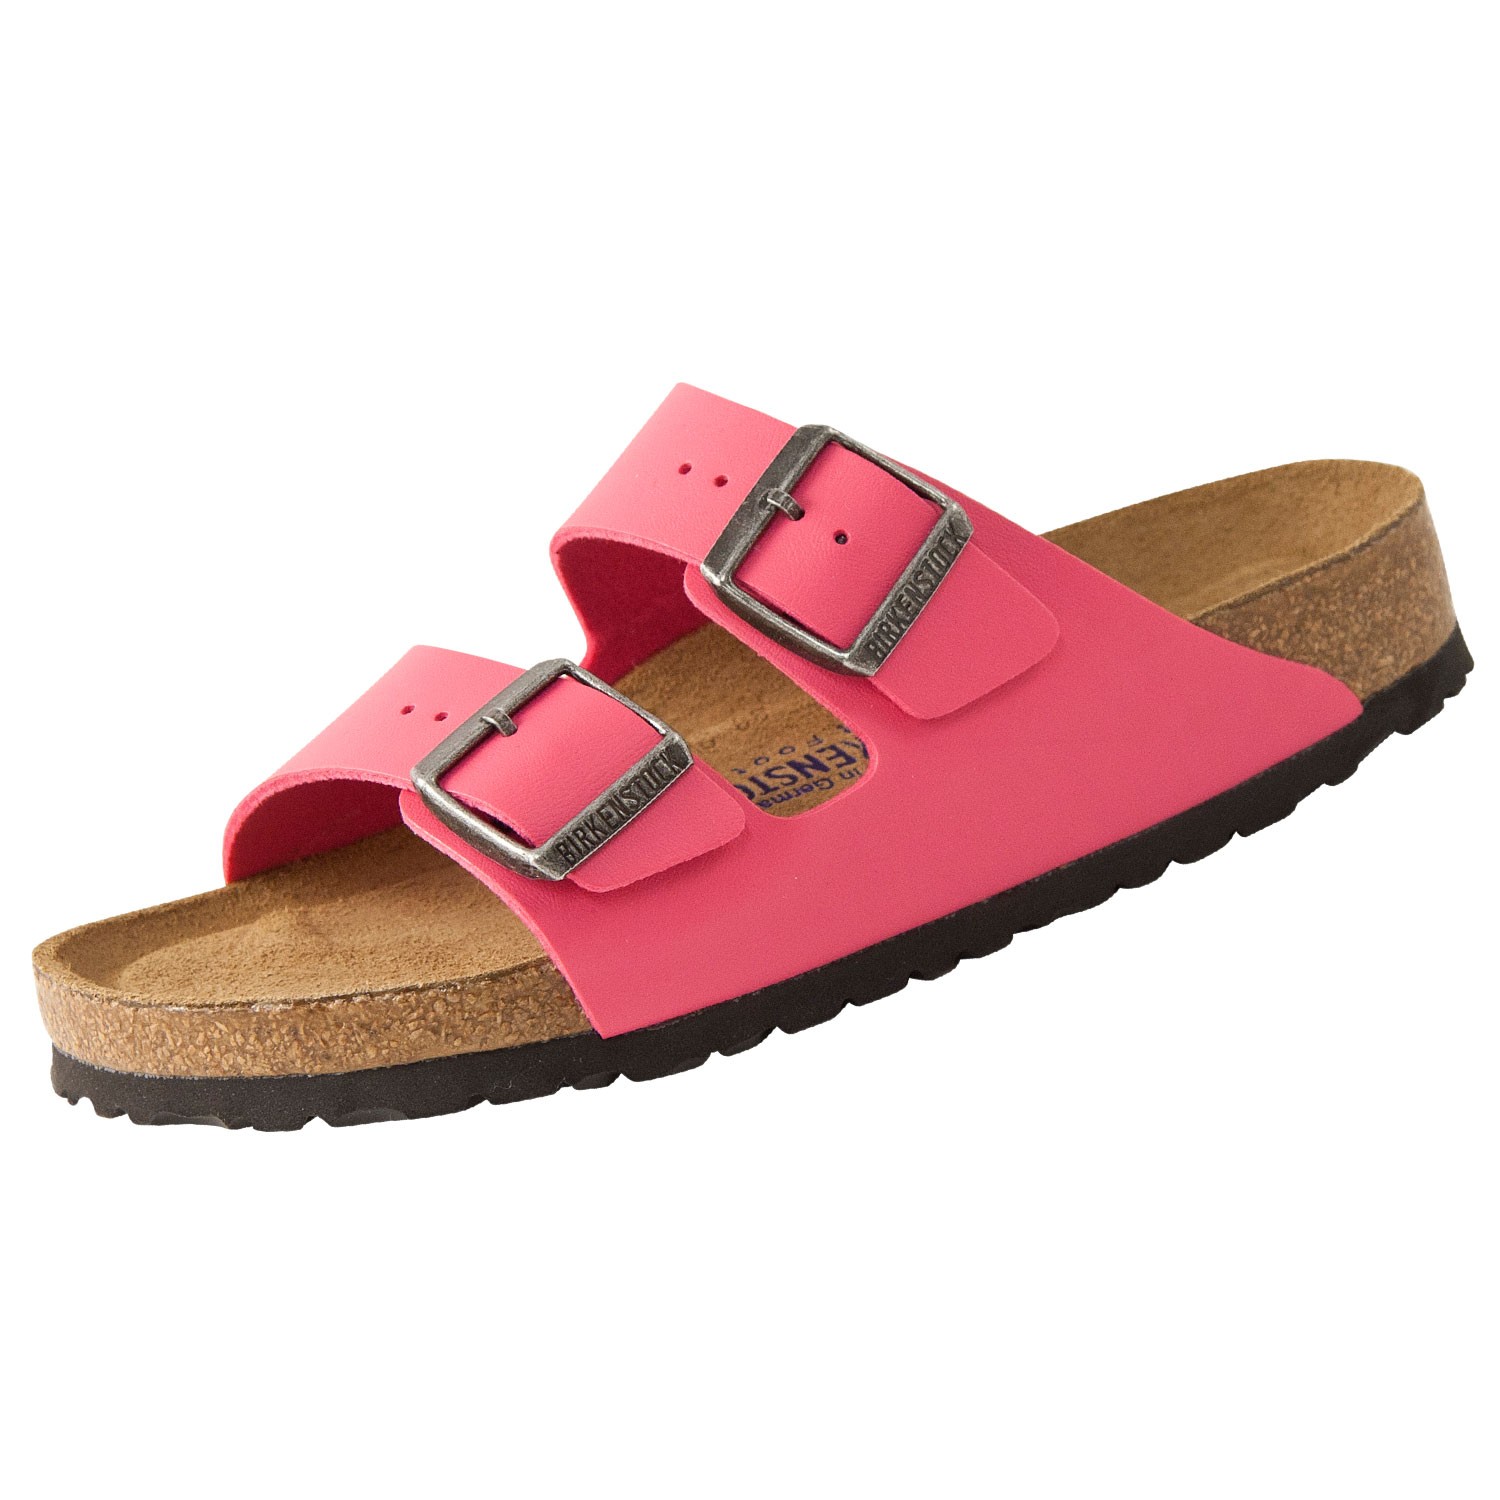 Birkenstock Arizona Soft Footbed Pink - Work shoes - Shoes - Timarco ...